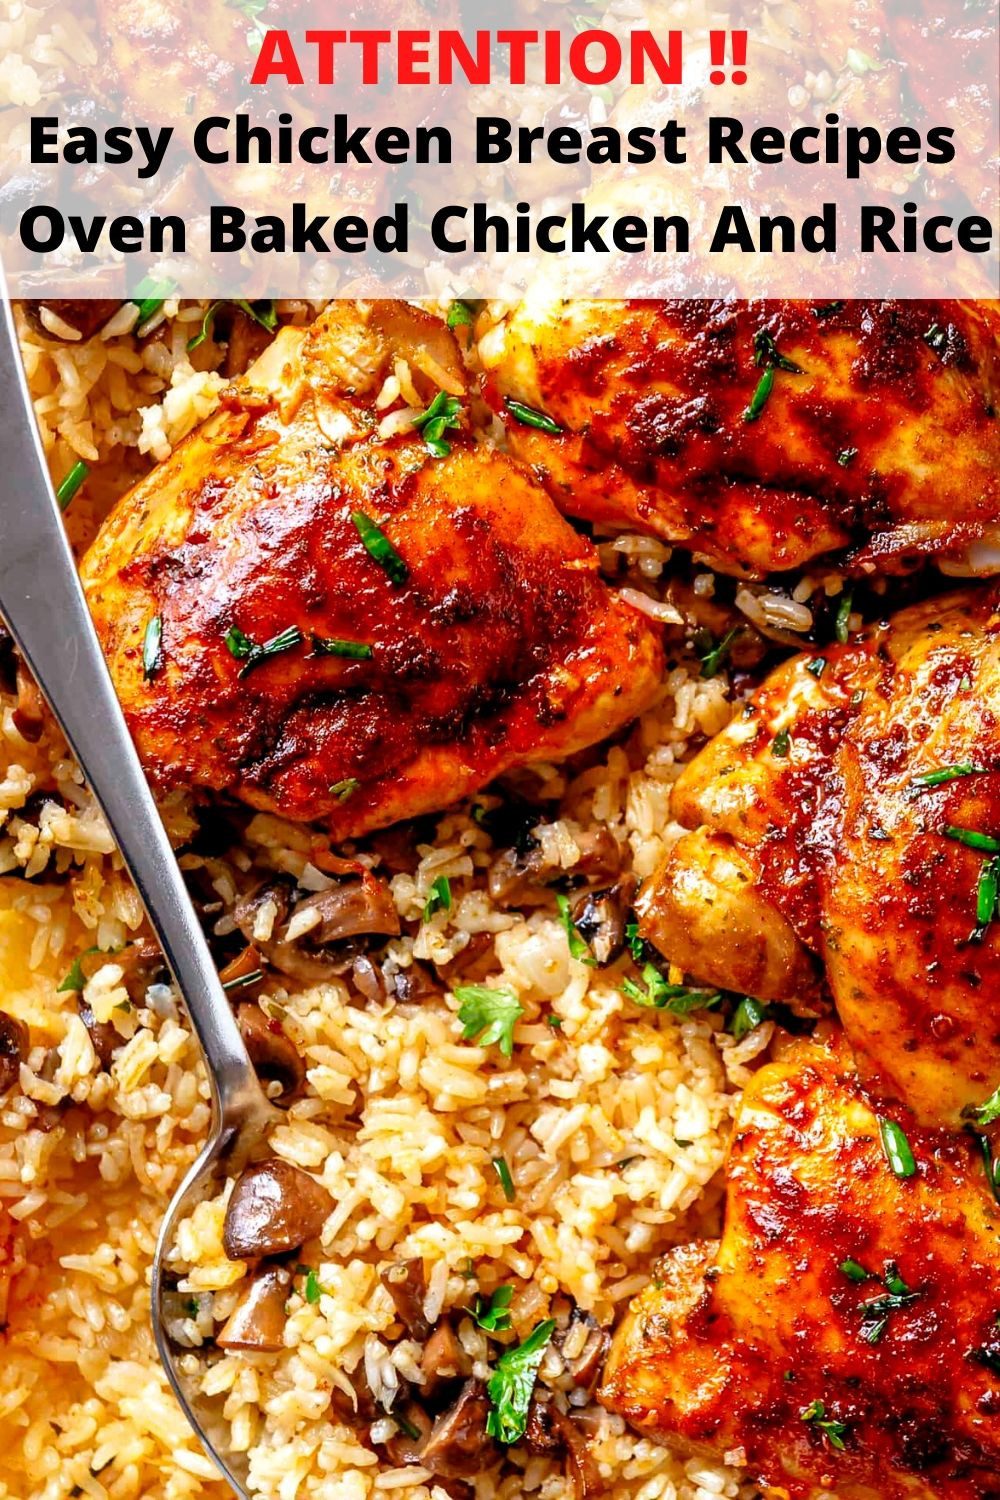 Baked Chicken And Rice With Chicken Broth
 Easy Chicken Breast Recipes Oven Baked Chicken And Rice